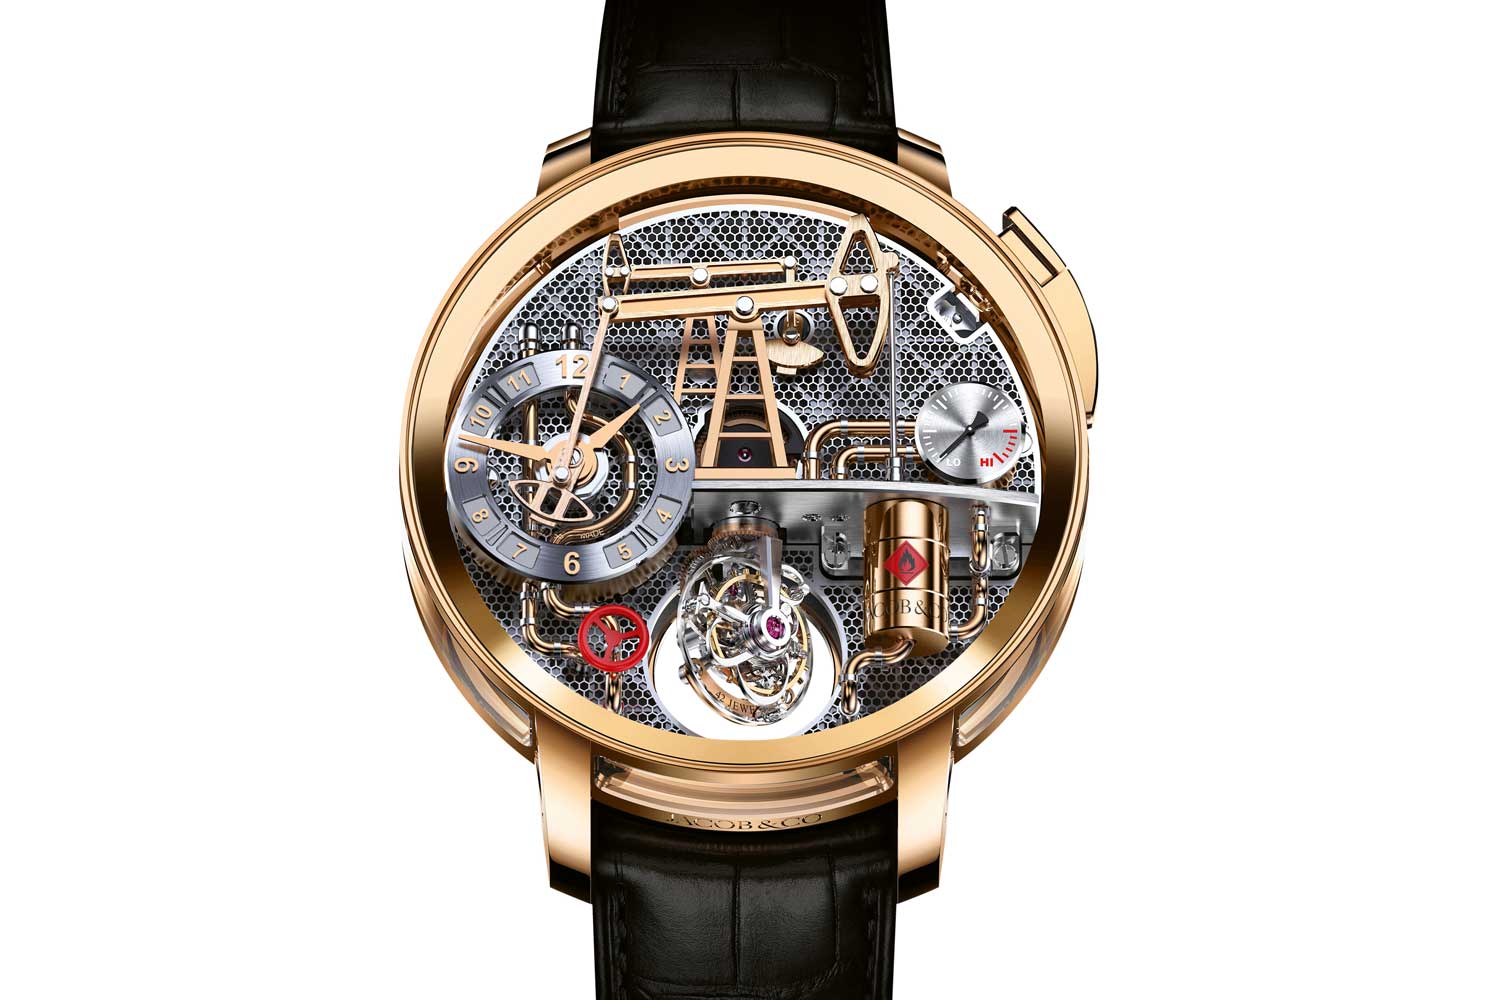 Another distinctive creation is the Oil Pump Rose Gold featuring Jacob and Co.'s double-axis tourbillon and inspired by the tradition of automatons in the watch industry